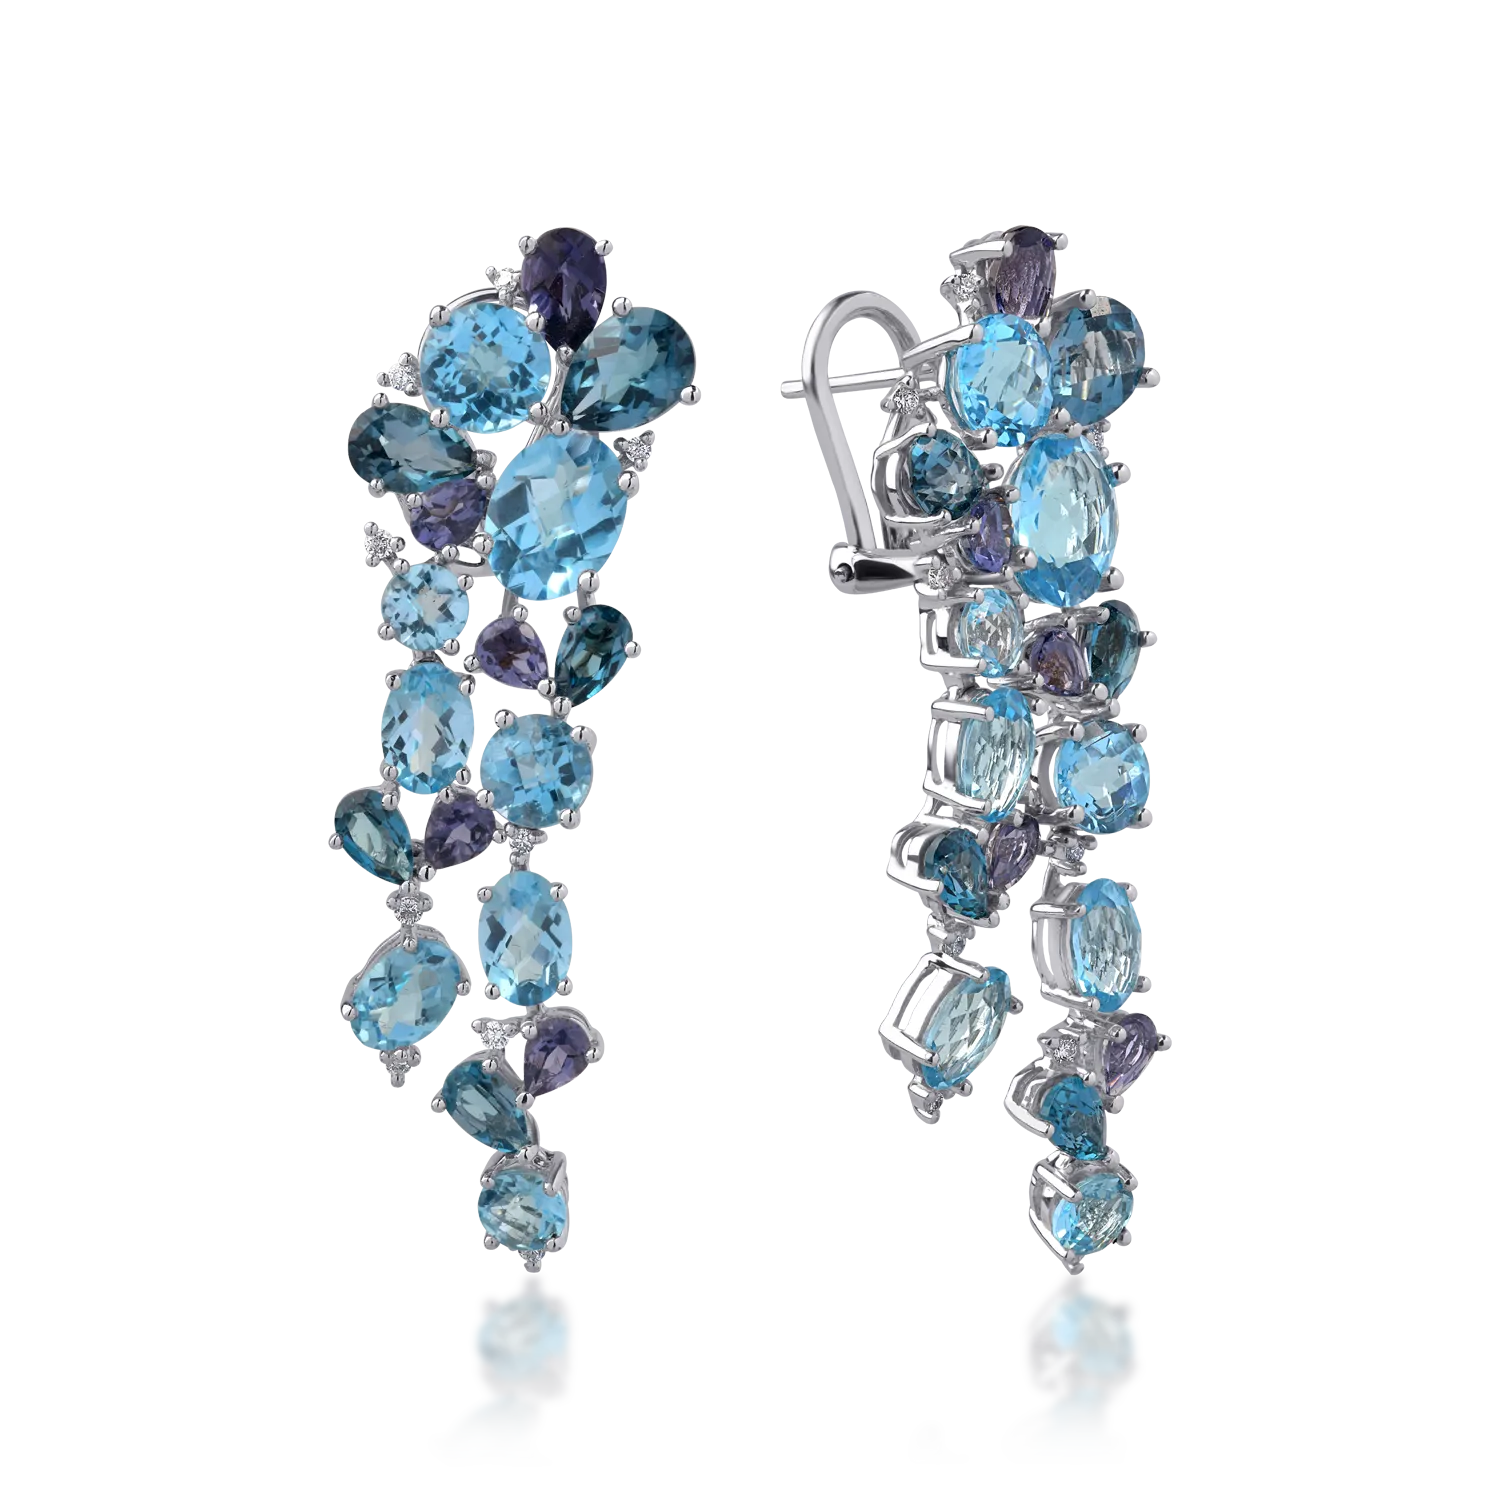 18K white gold earrings with 17.67ct precious and semi-precious stones